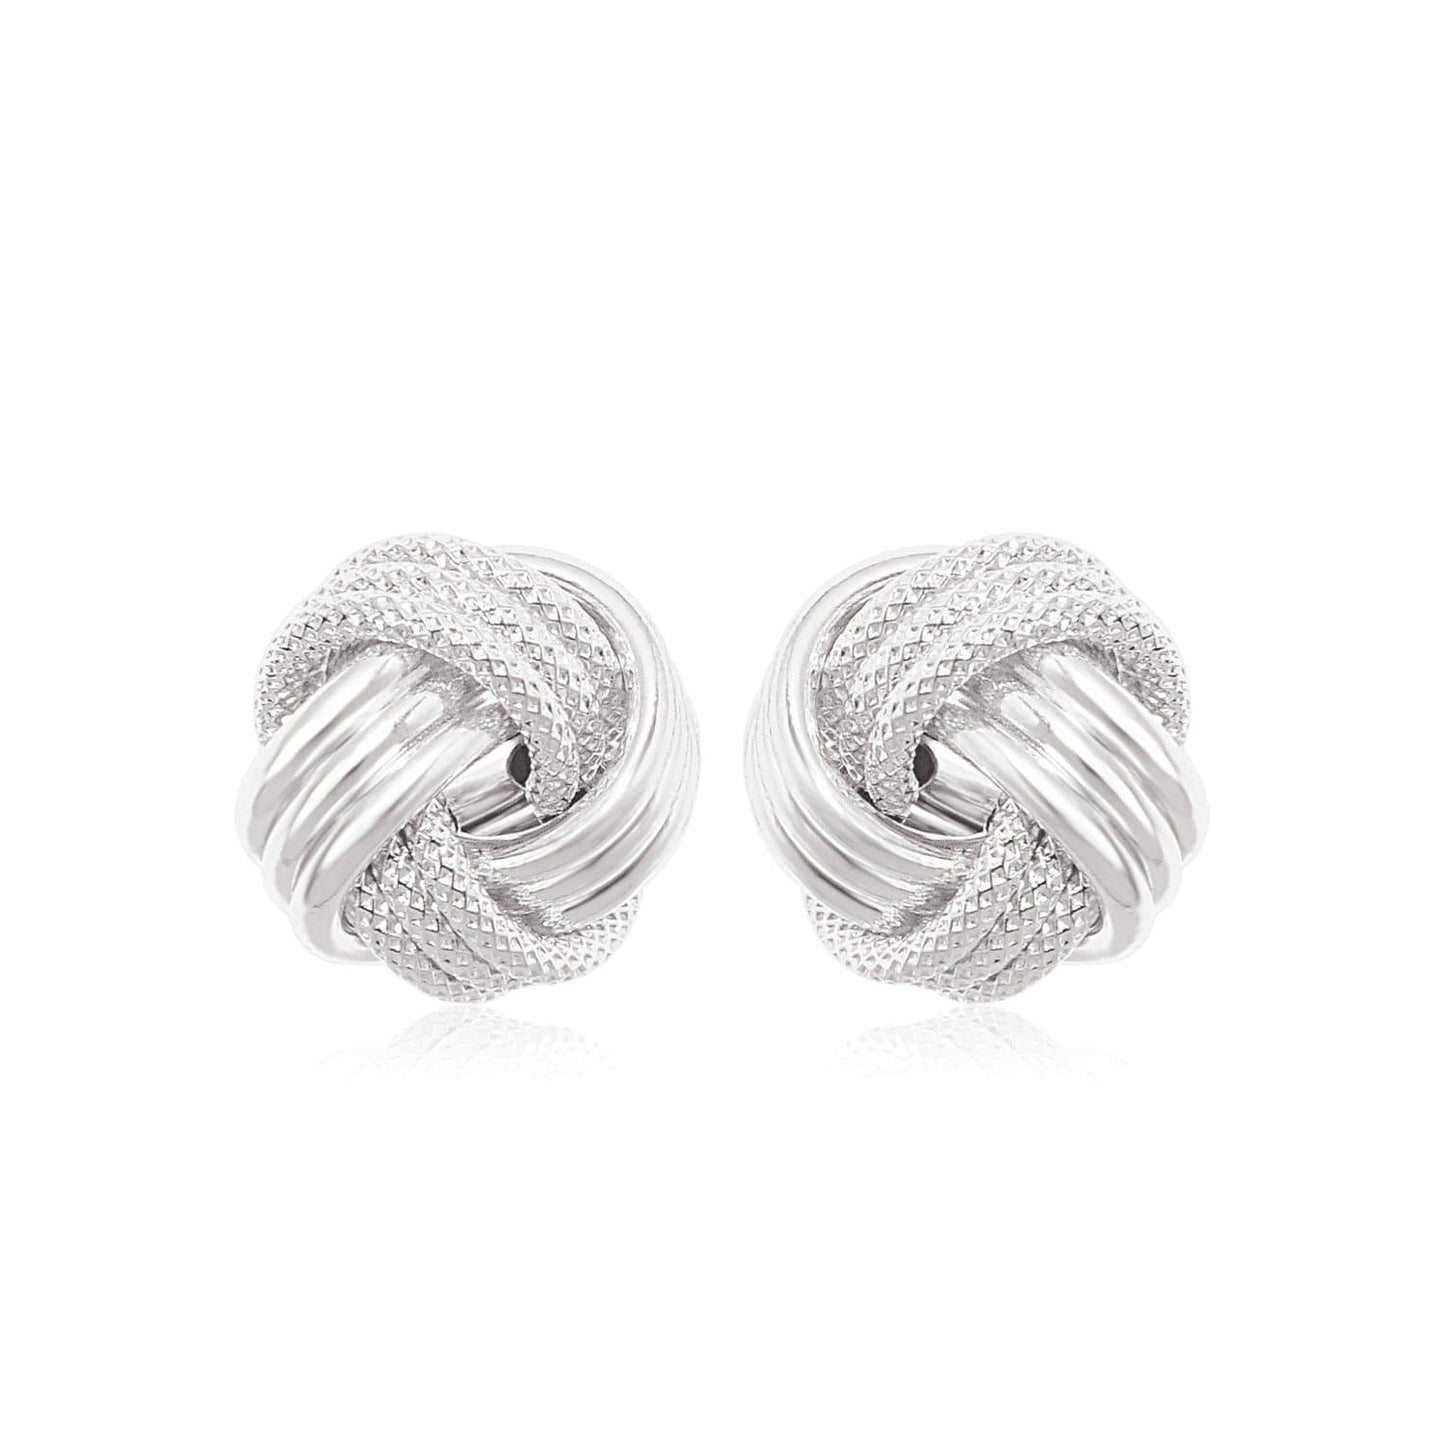 14k White Gold Love Knot with Ridge Texture Earrings